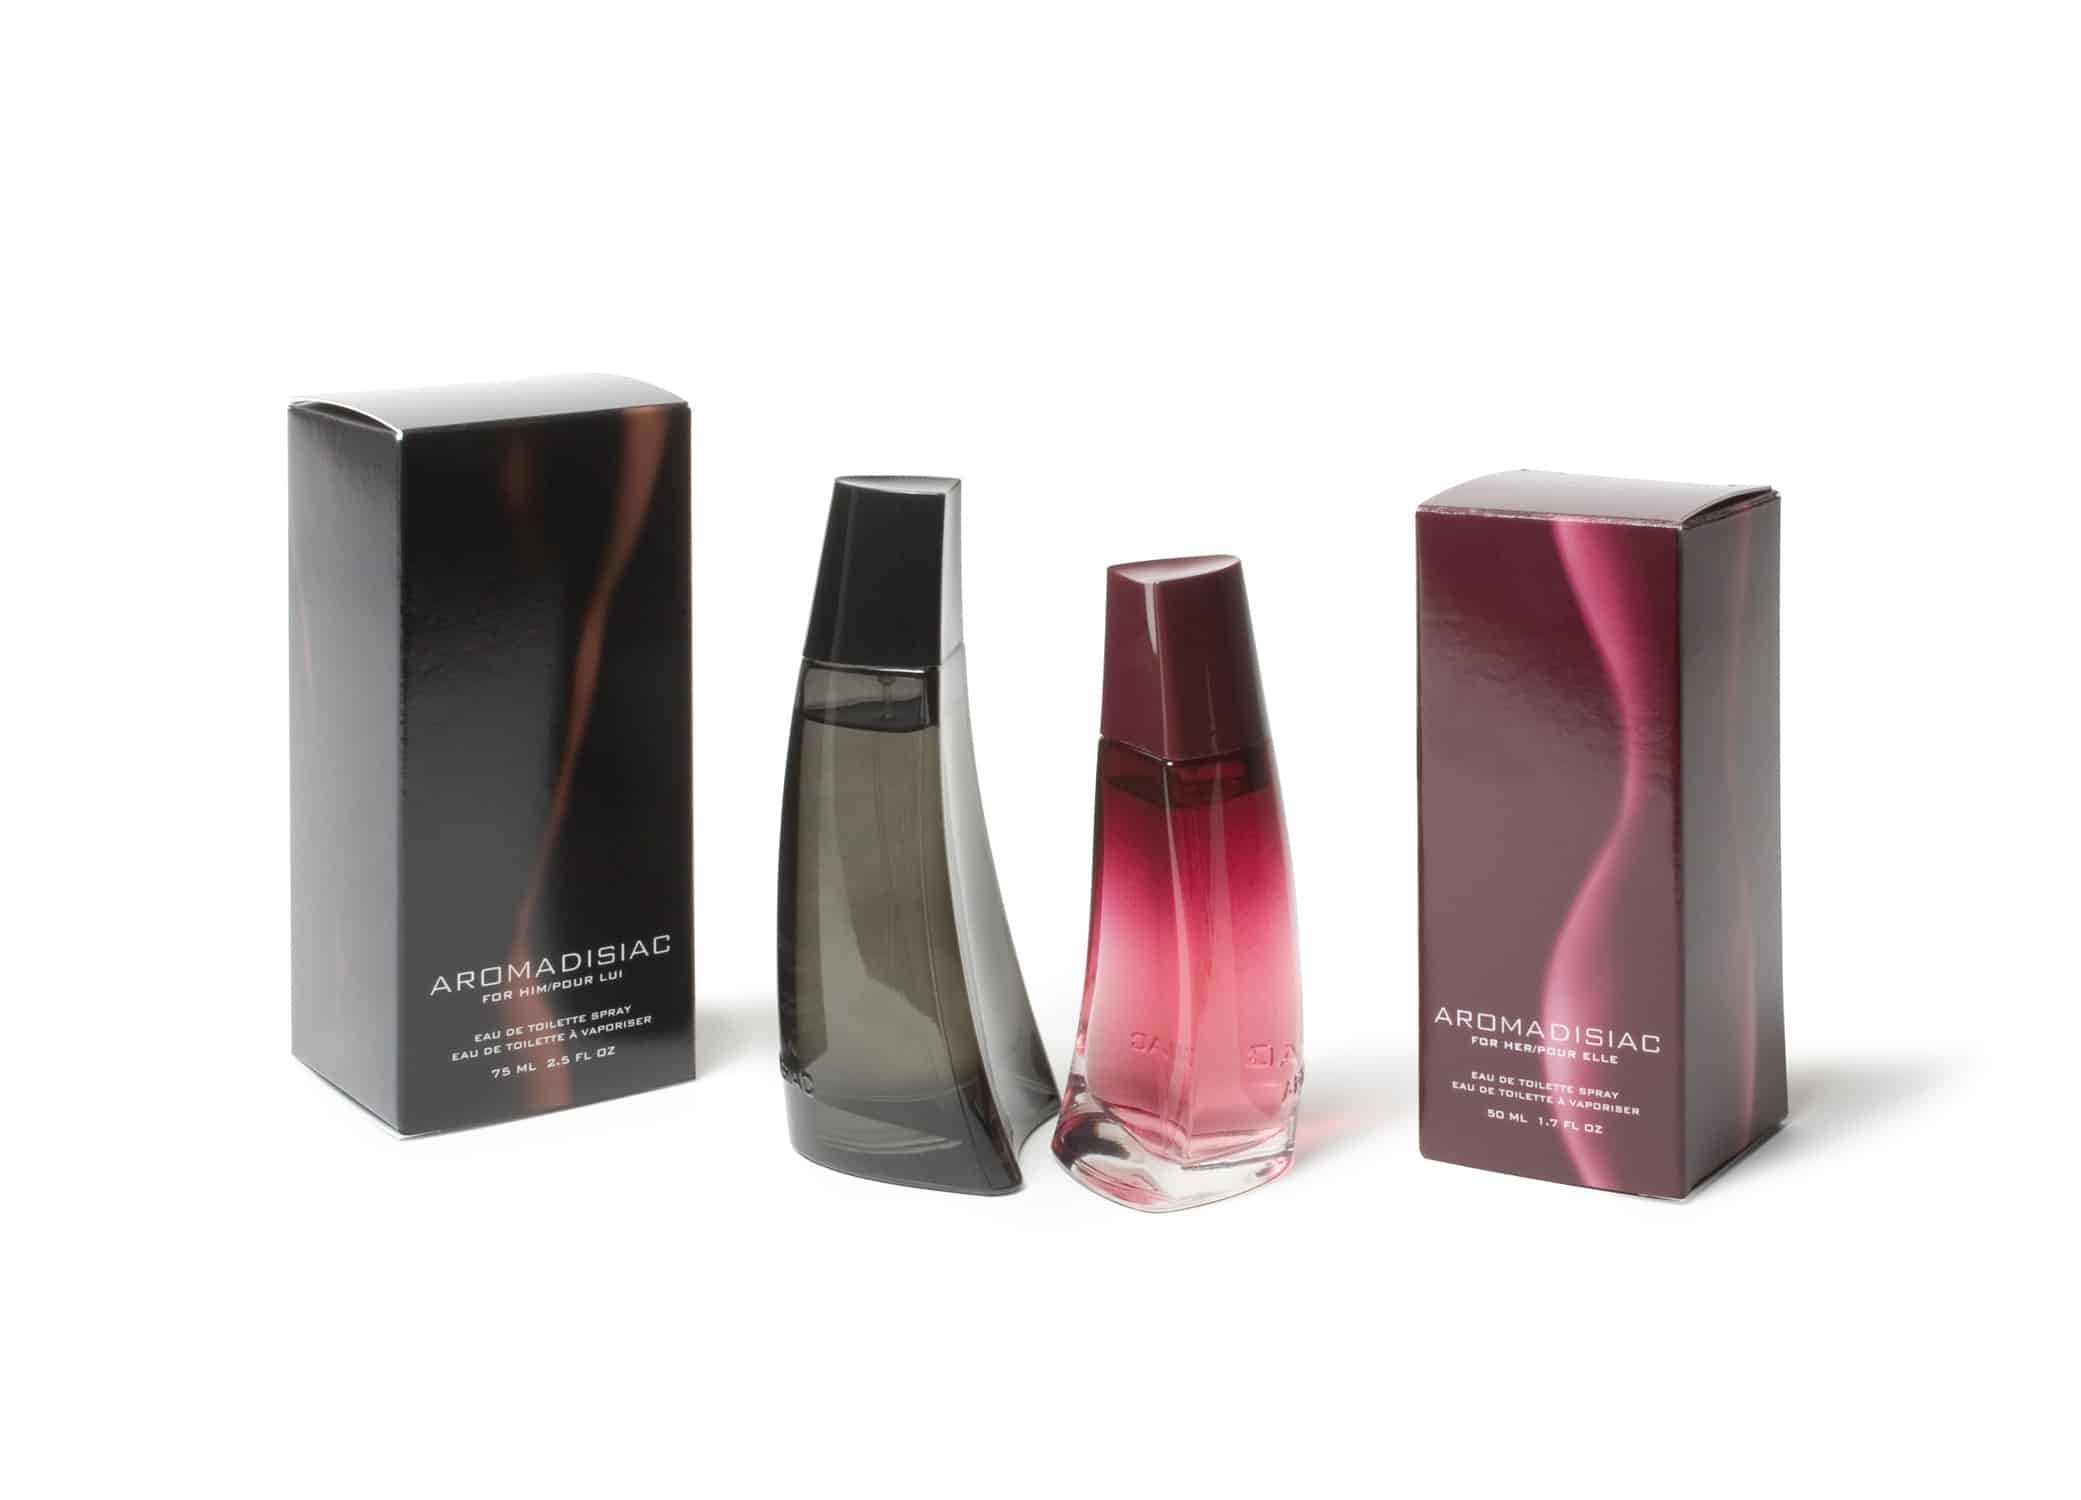 Avon Aromadisiac fragrance product packaging boxes in pink ombre for her and translucent black for him.